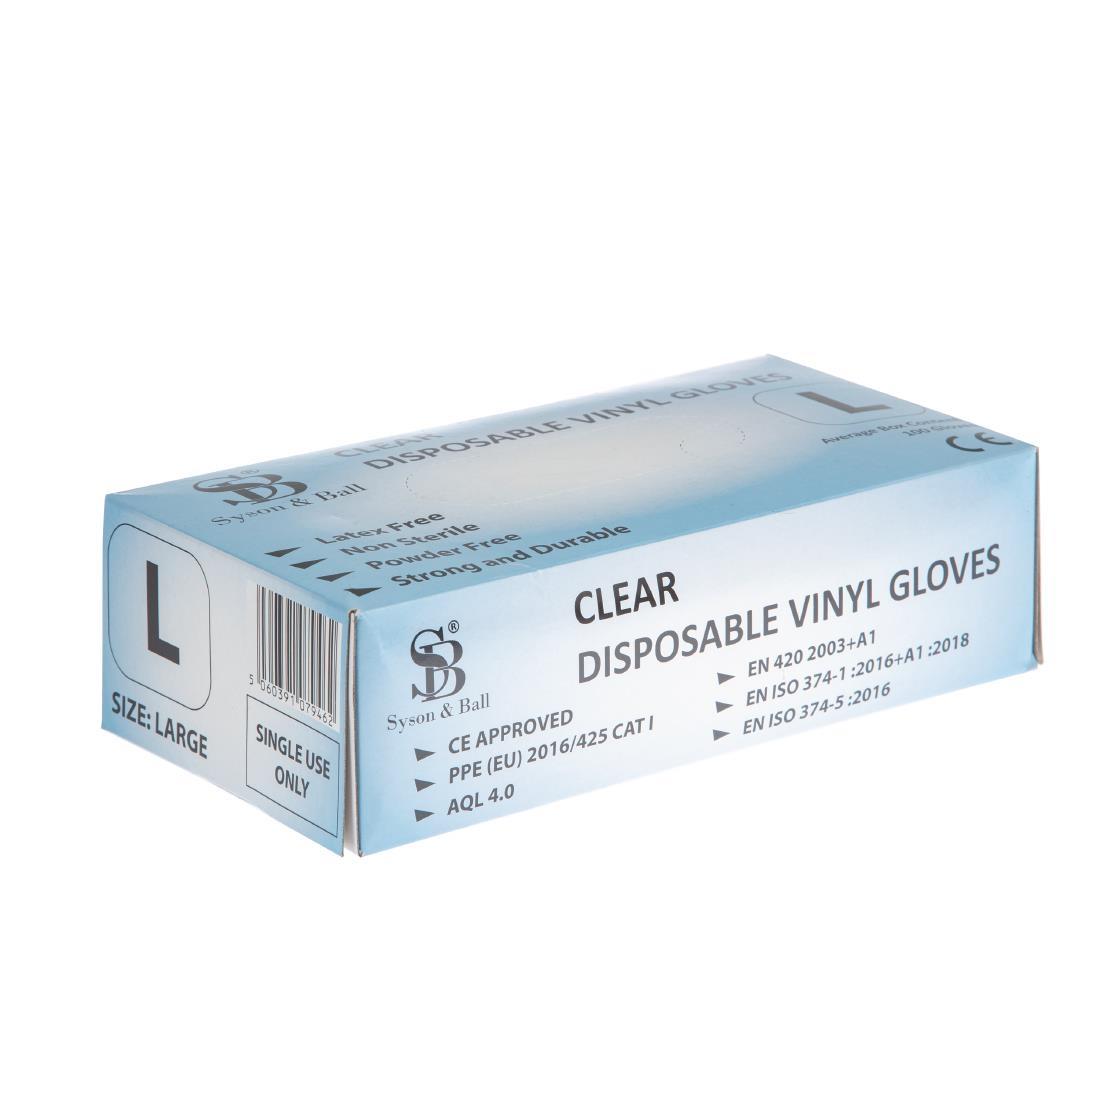 Powder-Free Latex Gloves Clear Extra Large (Pack of 100) - Y262-XL  - 2